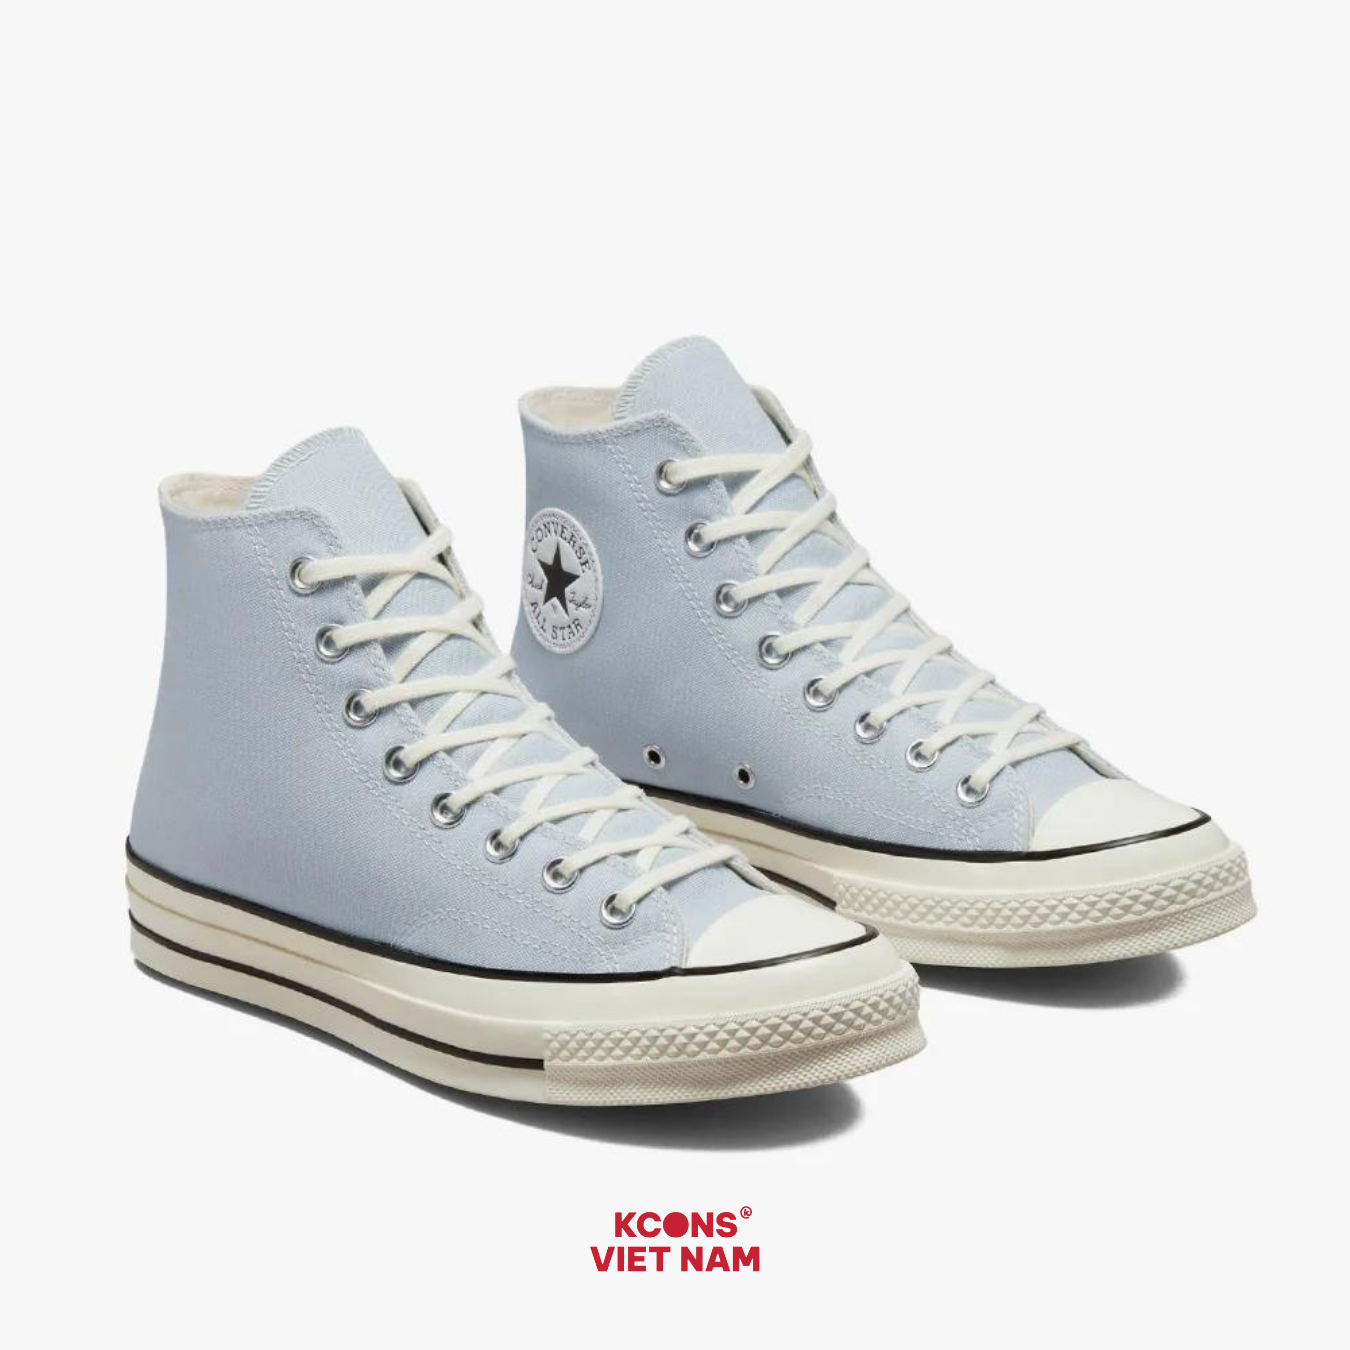  Giày Converse Chuck Taylor 1970 Ghosted High Top A03447C 